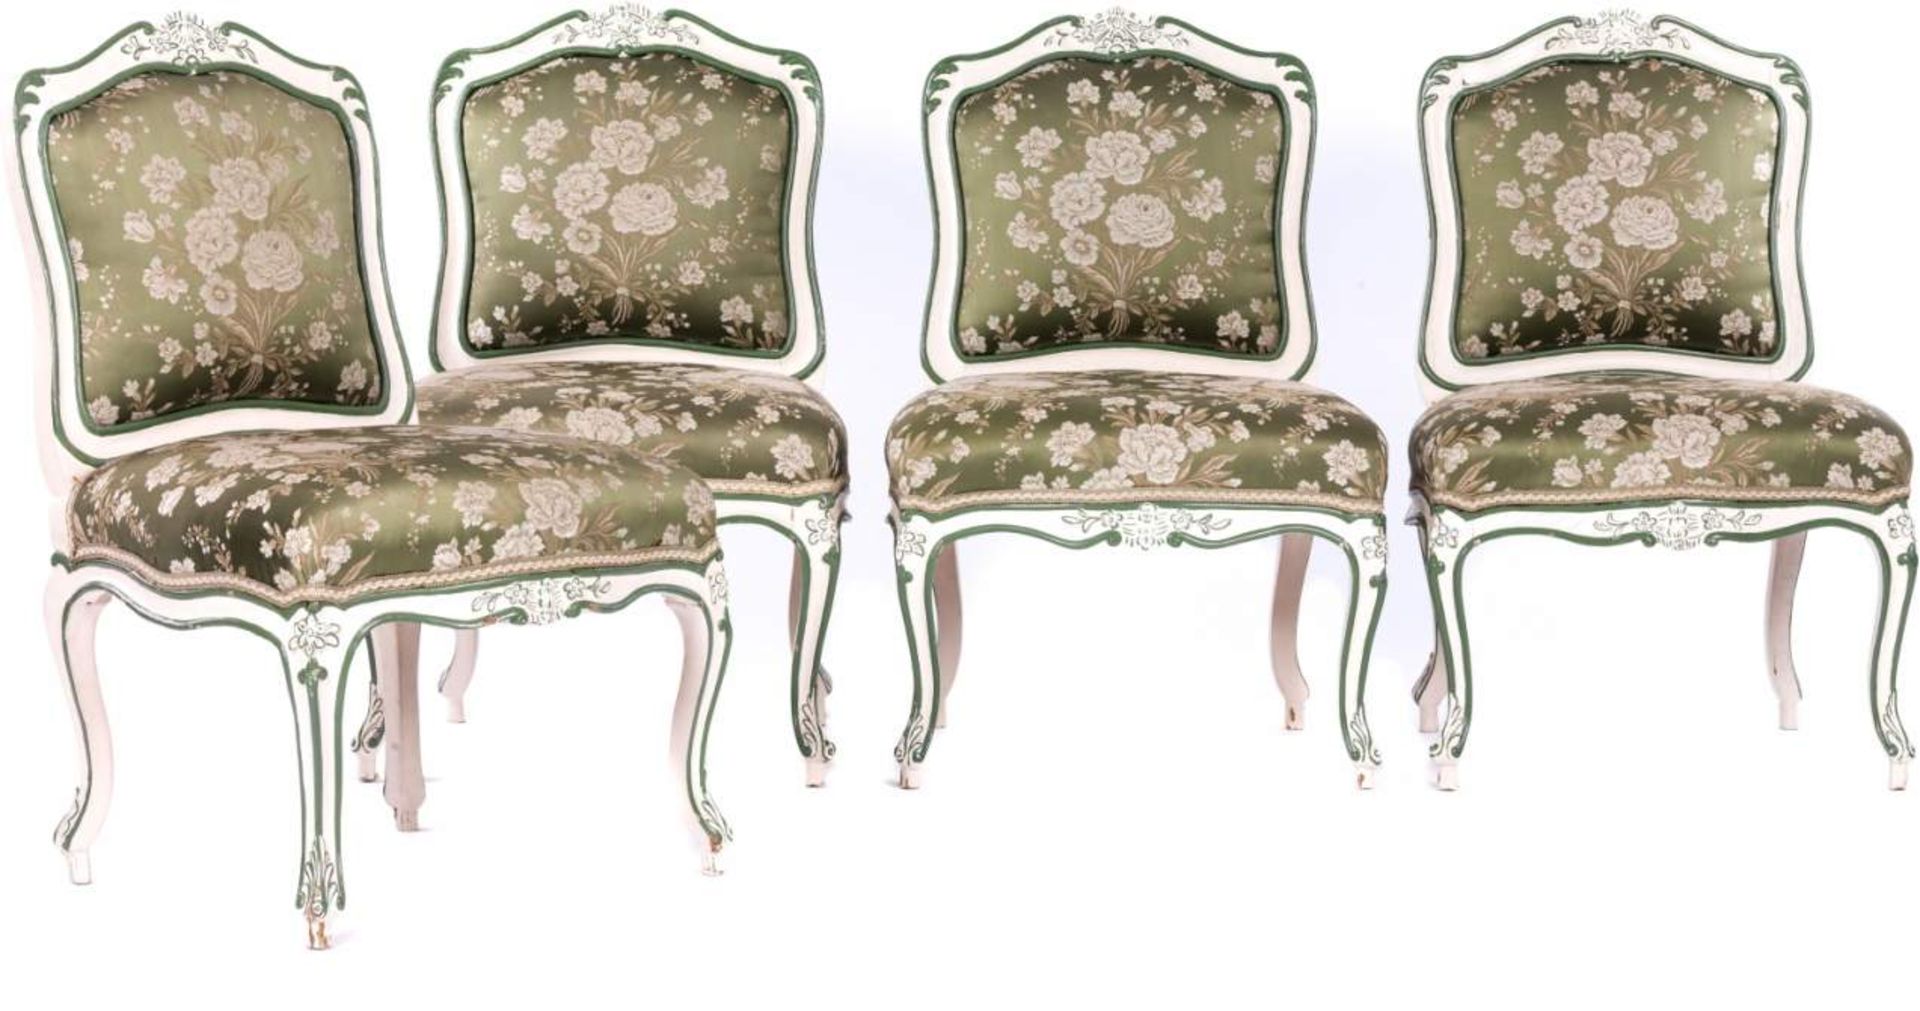 Set of four Baroque chairs from the German princely House of Thurn und TaxisHeight: 90.5 cm. - Bild 5 aus 5